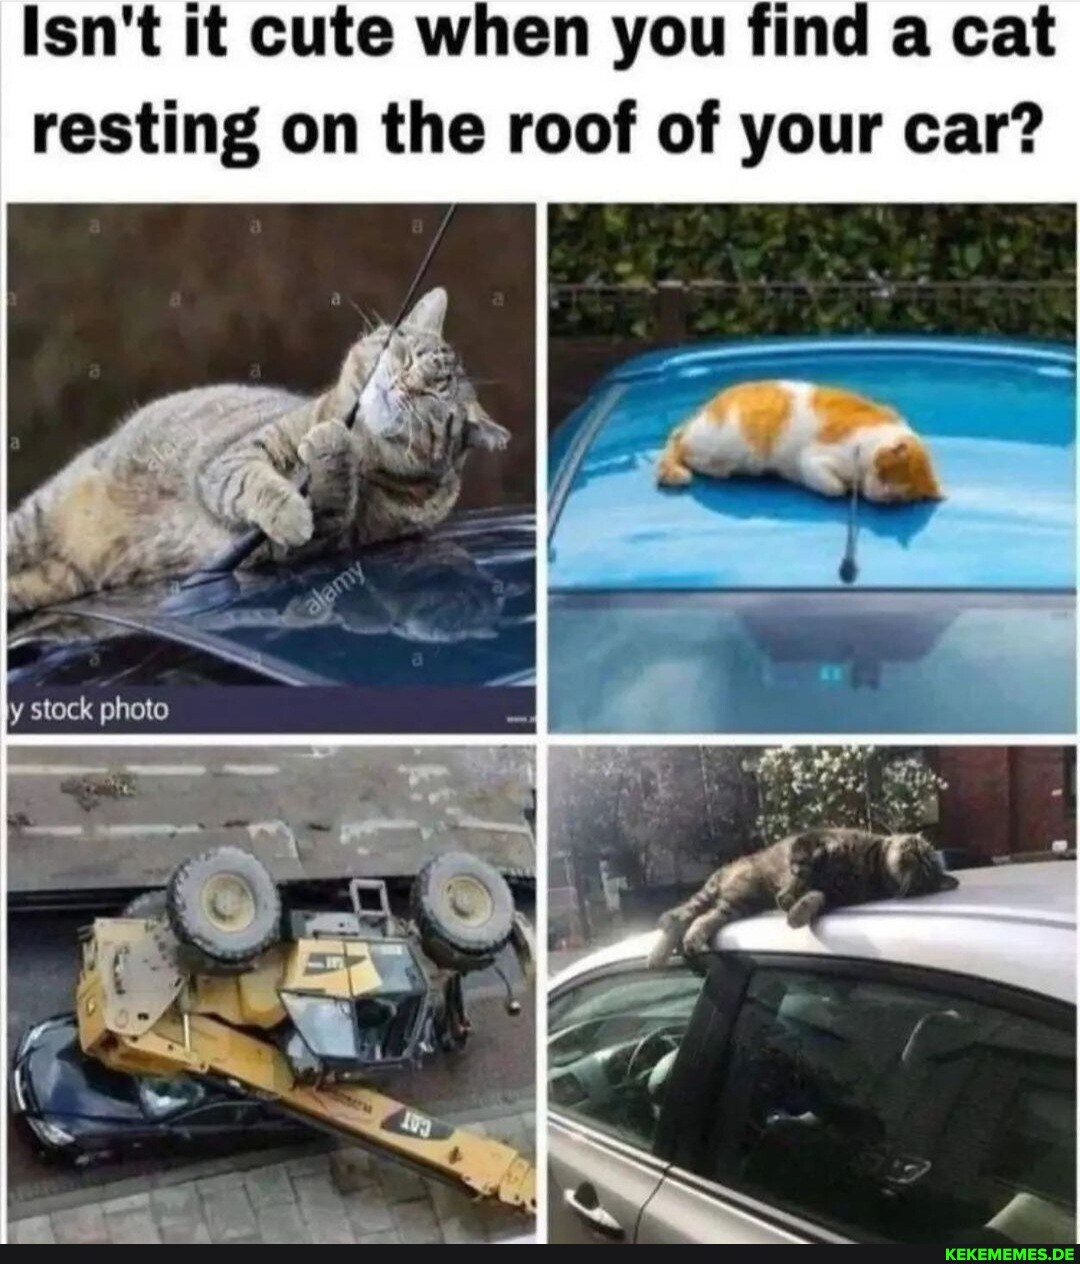 Isn't it cute when you find a cat resting on the roof of your car?